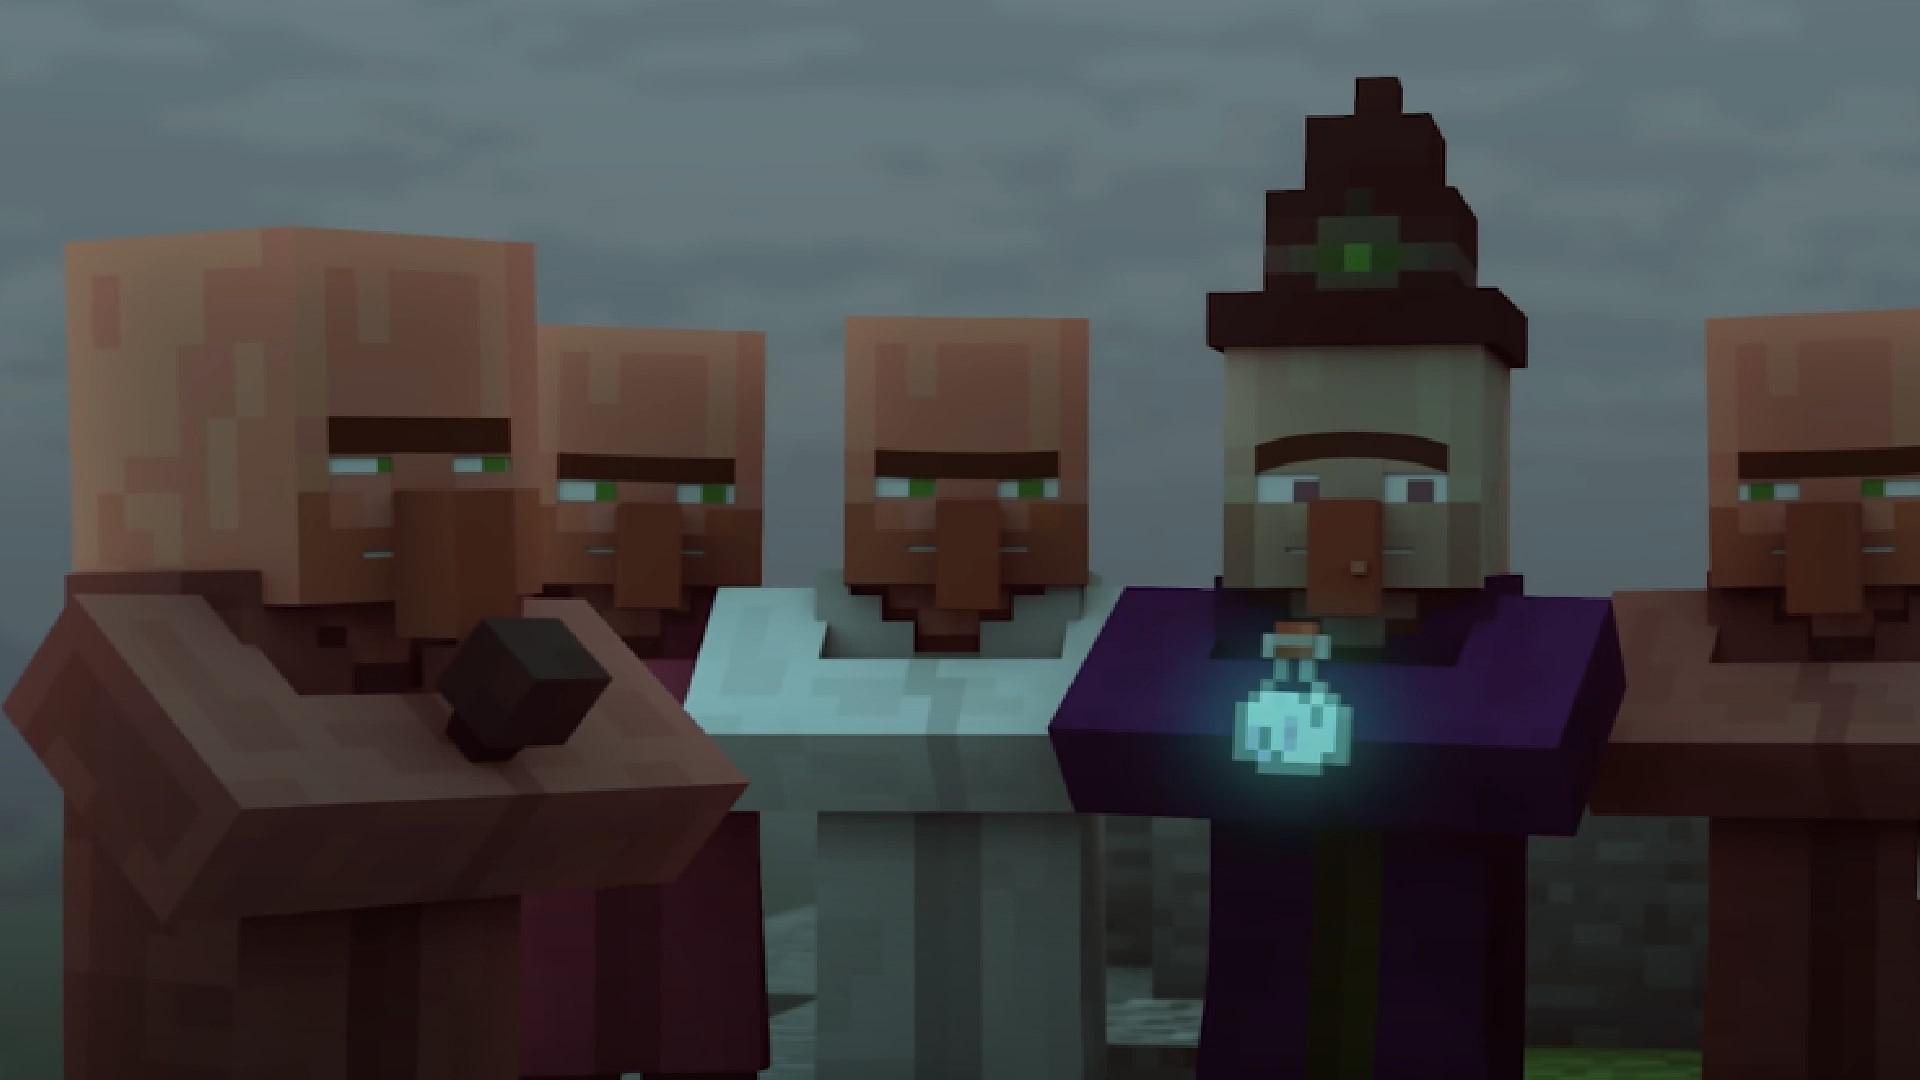 An image featuring different types of Villagers from Minecraft